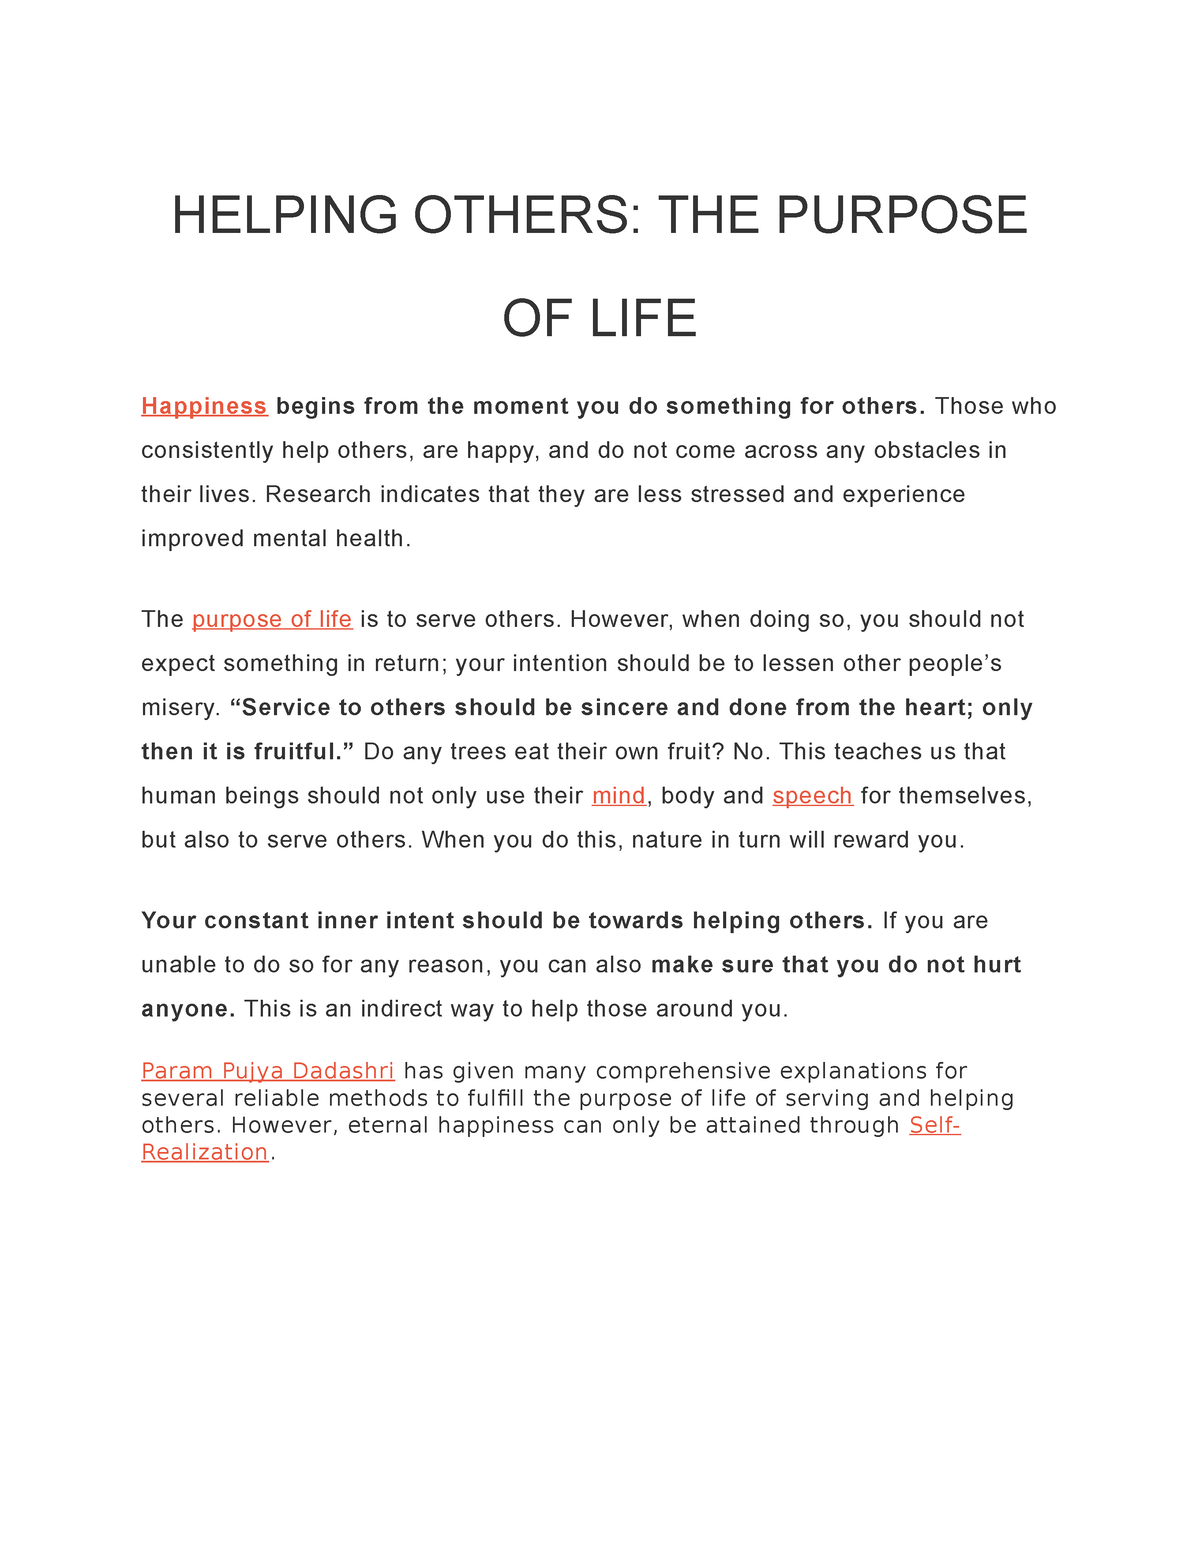 10 ways to help others essay